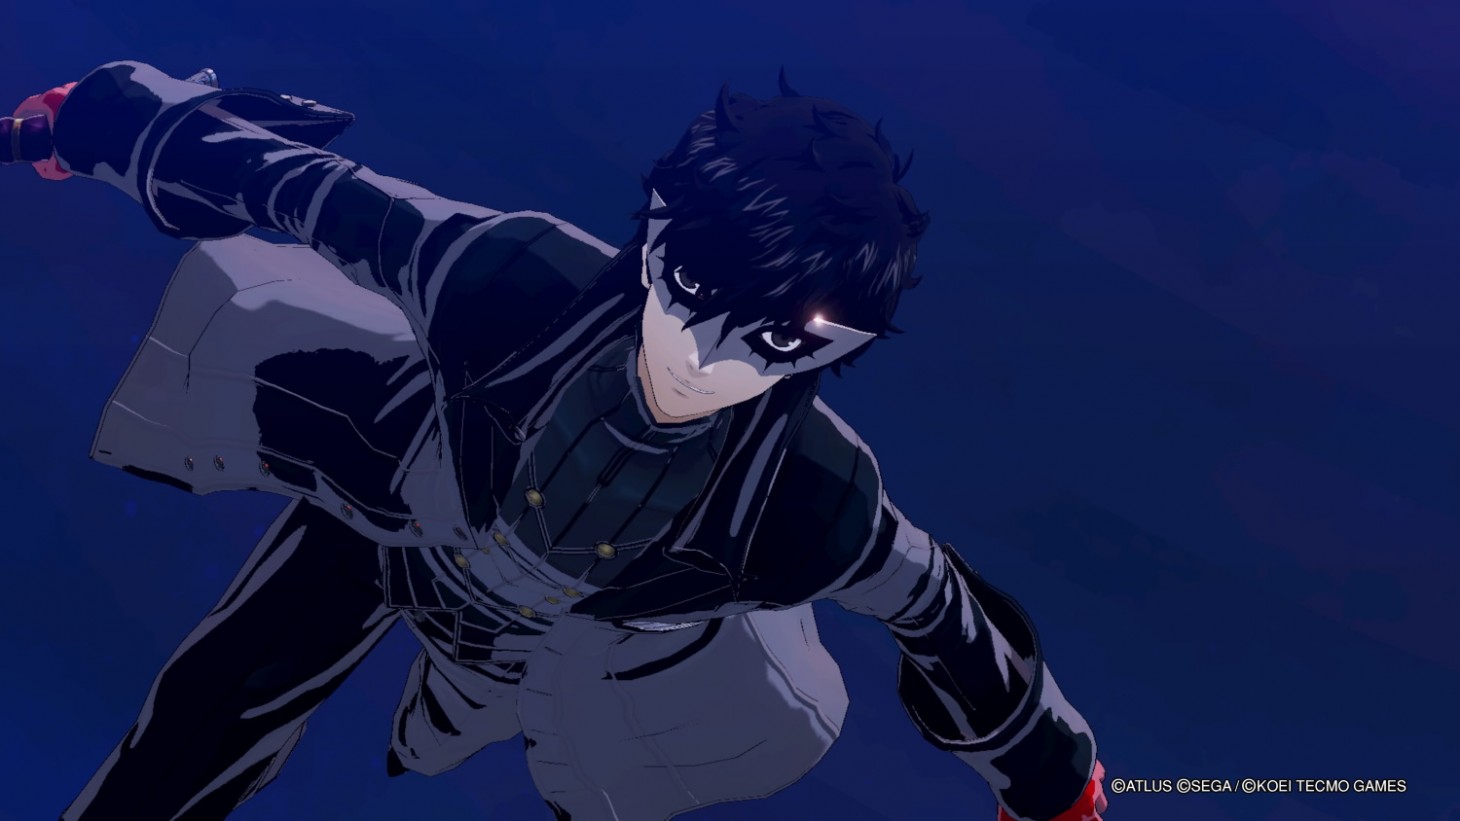 Persona 5 STRIKERS REVIEW SCORES ARE HERE